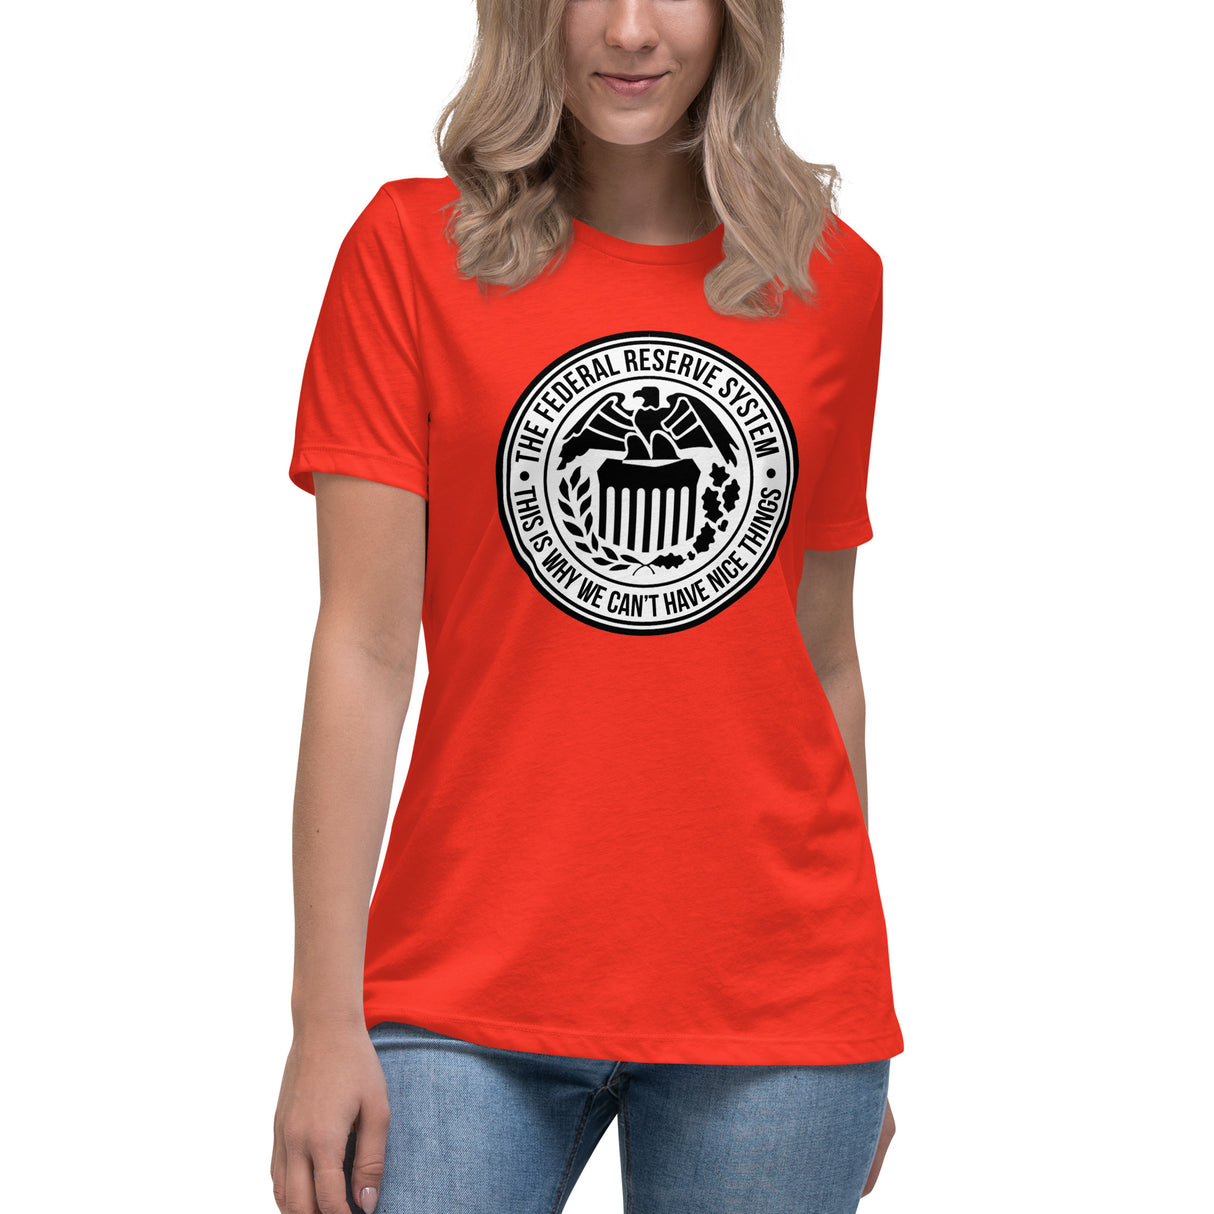 This is Why We Can't Have Nice Things Women's Shirt - Libertarian Country